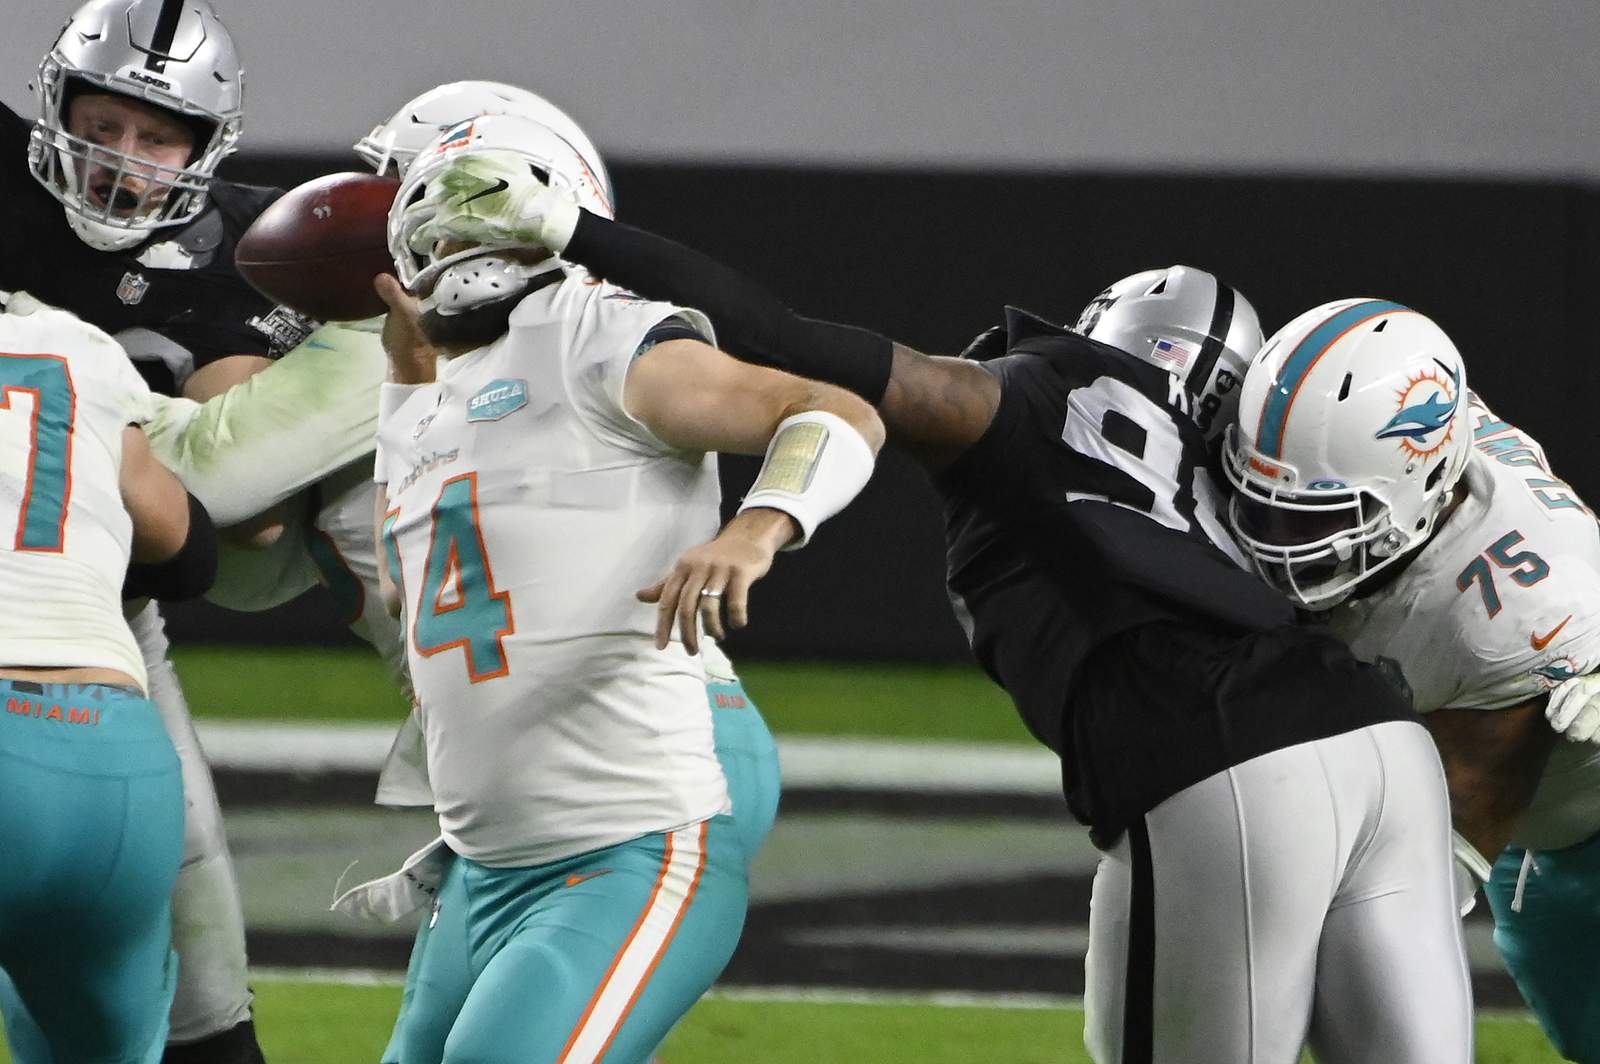 Dolphins stun Raiders 26-25 to move step closer to playoffs